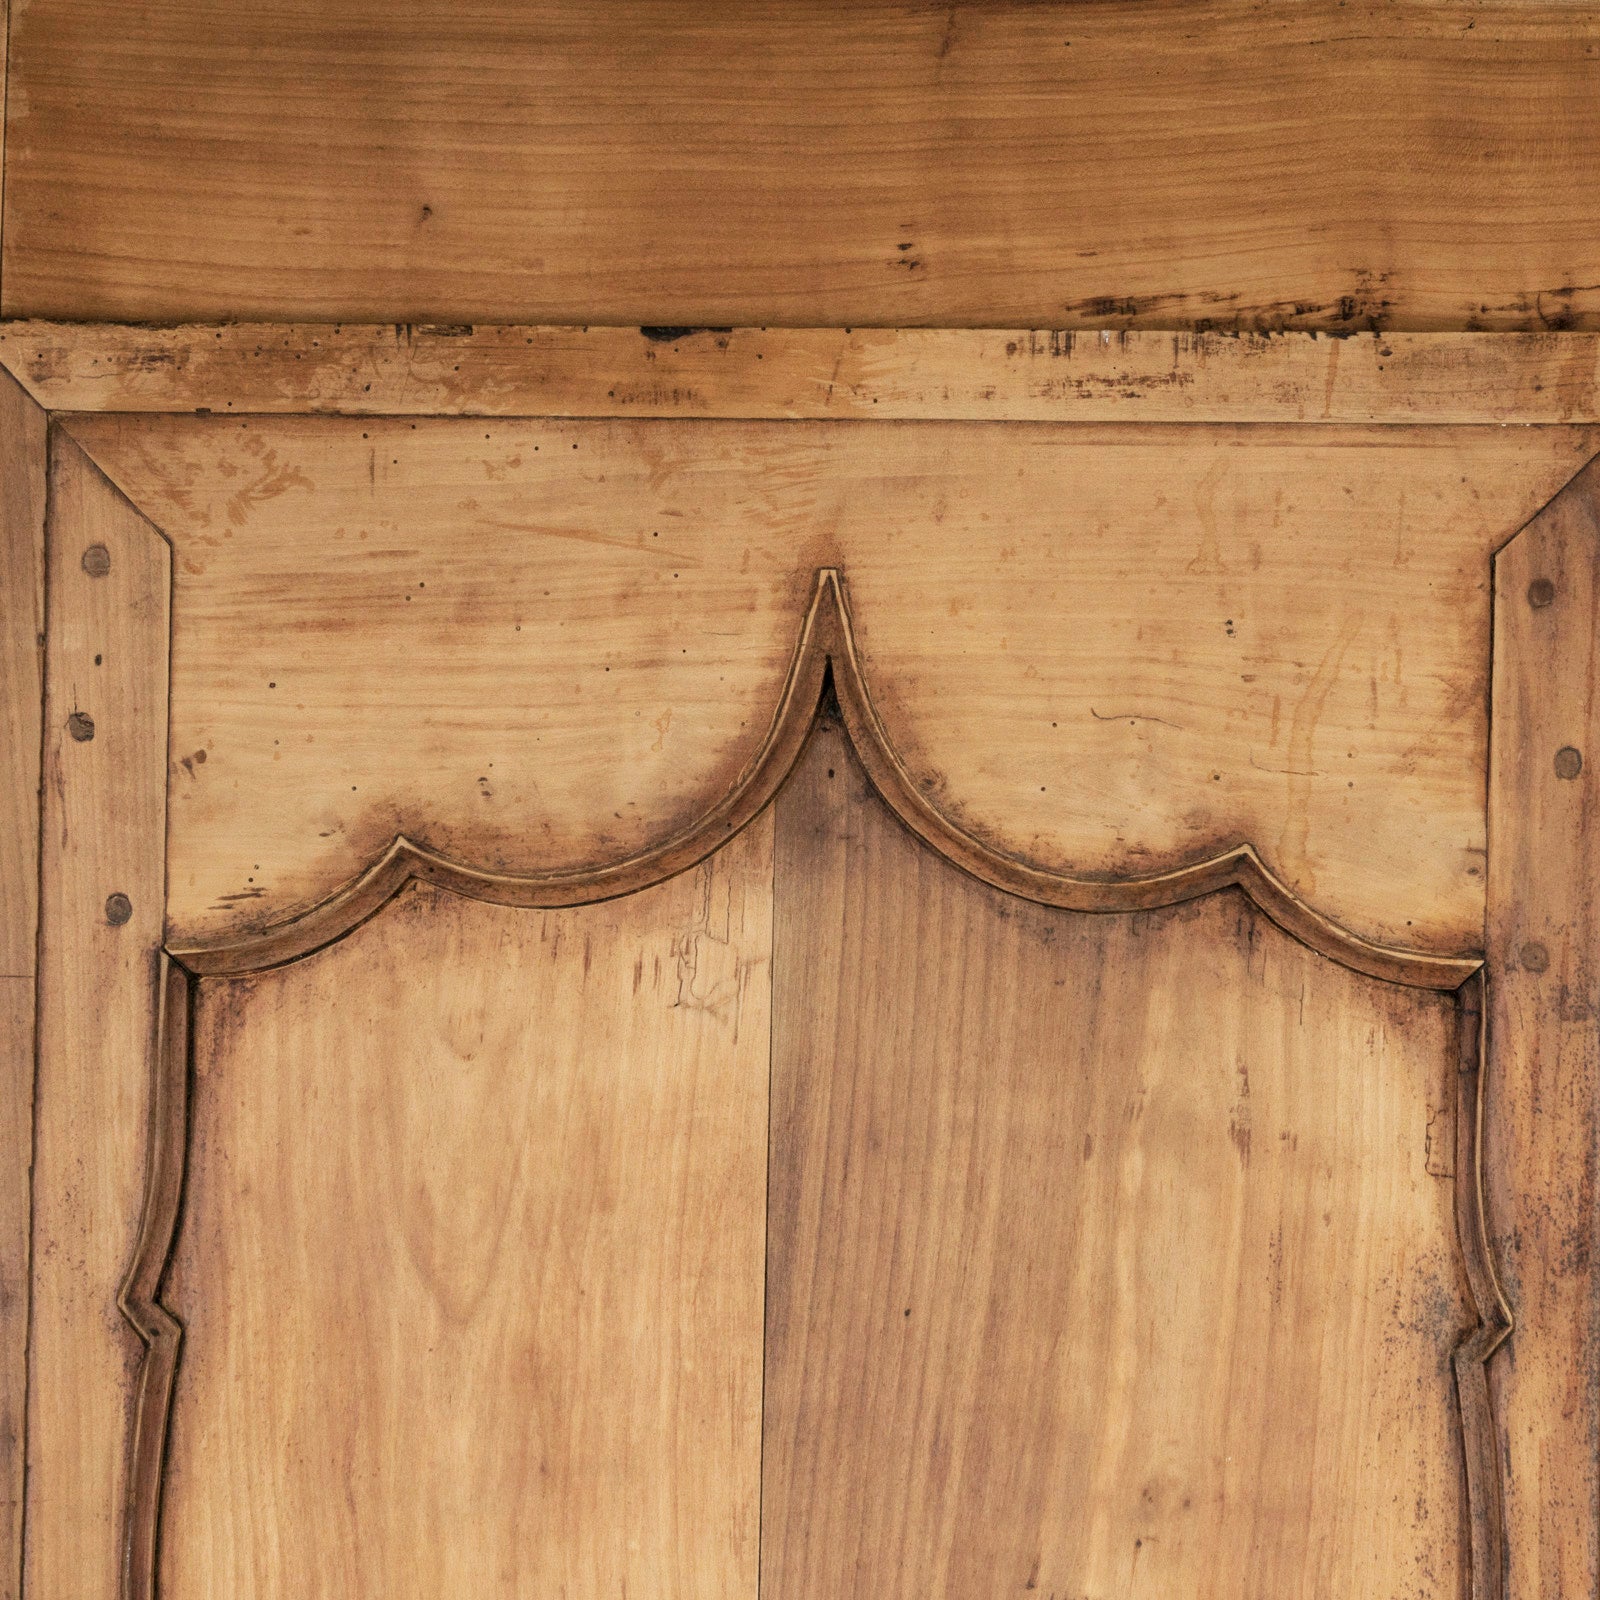 Rustic French Hand Carved Fruitwood Armoire